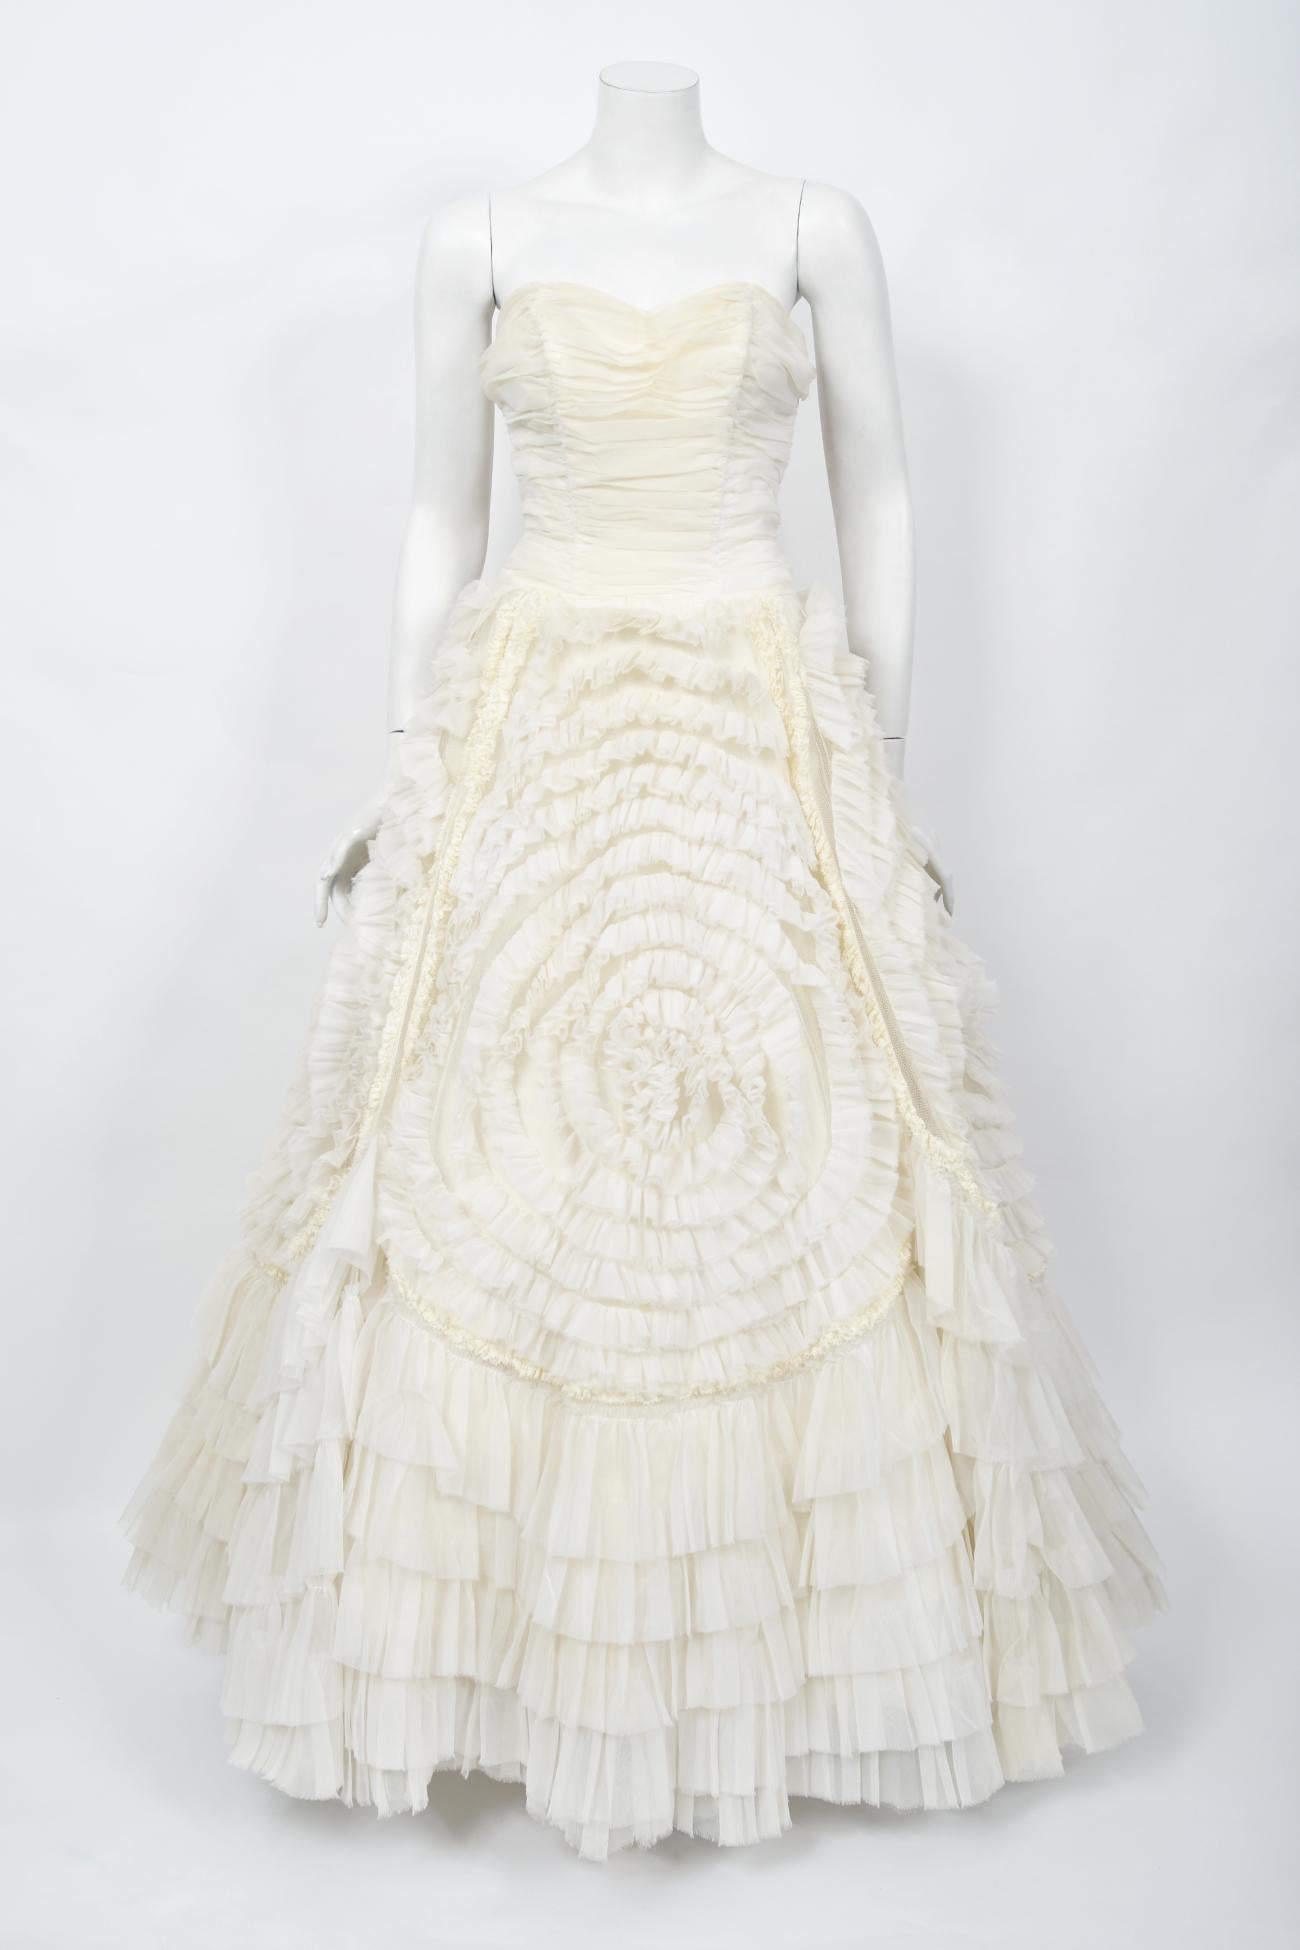 Vintage 1950's Ivory Chiffon Strapless Tiered Ruffle Full-Length Bridal Gown  7